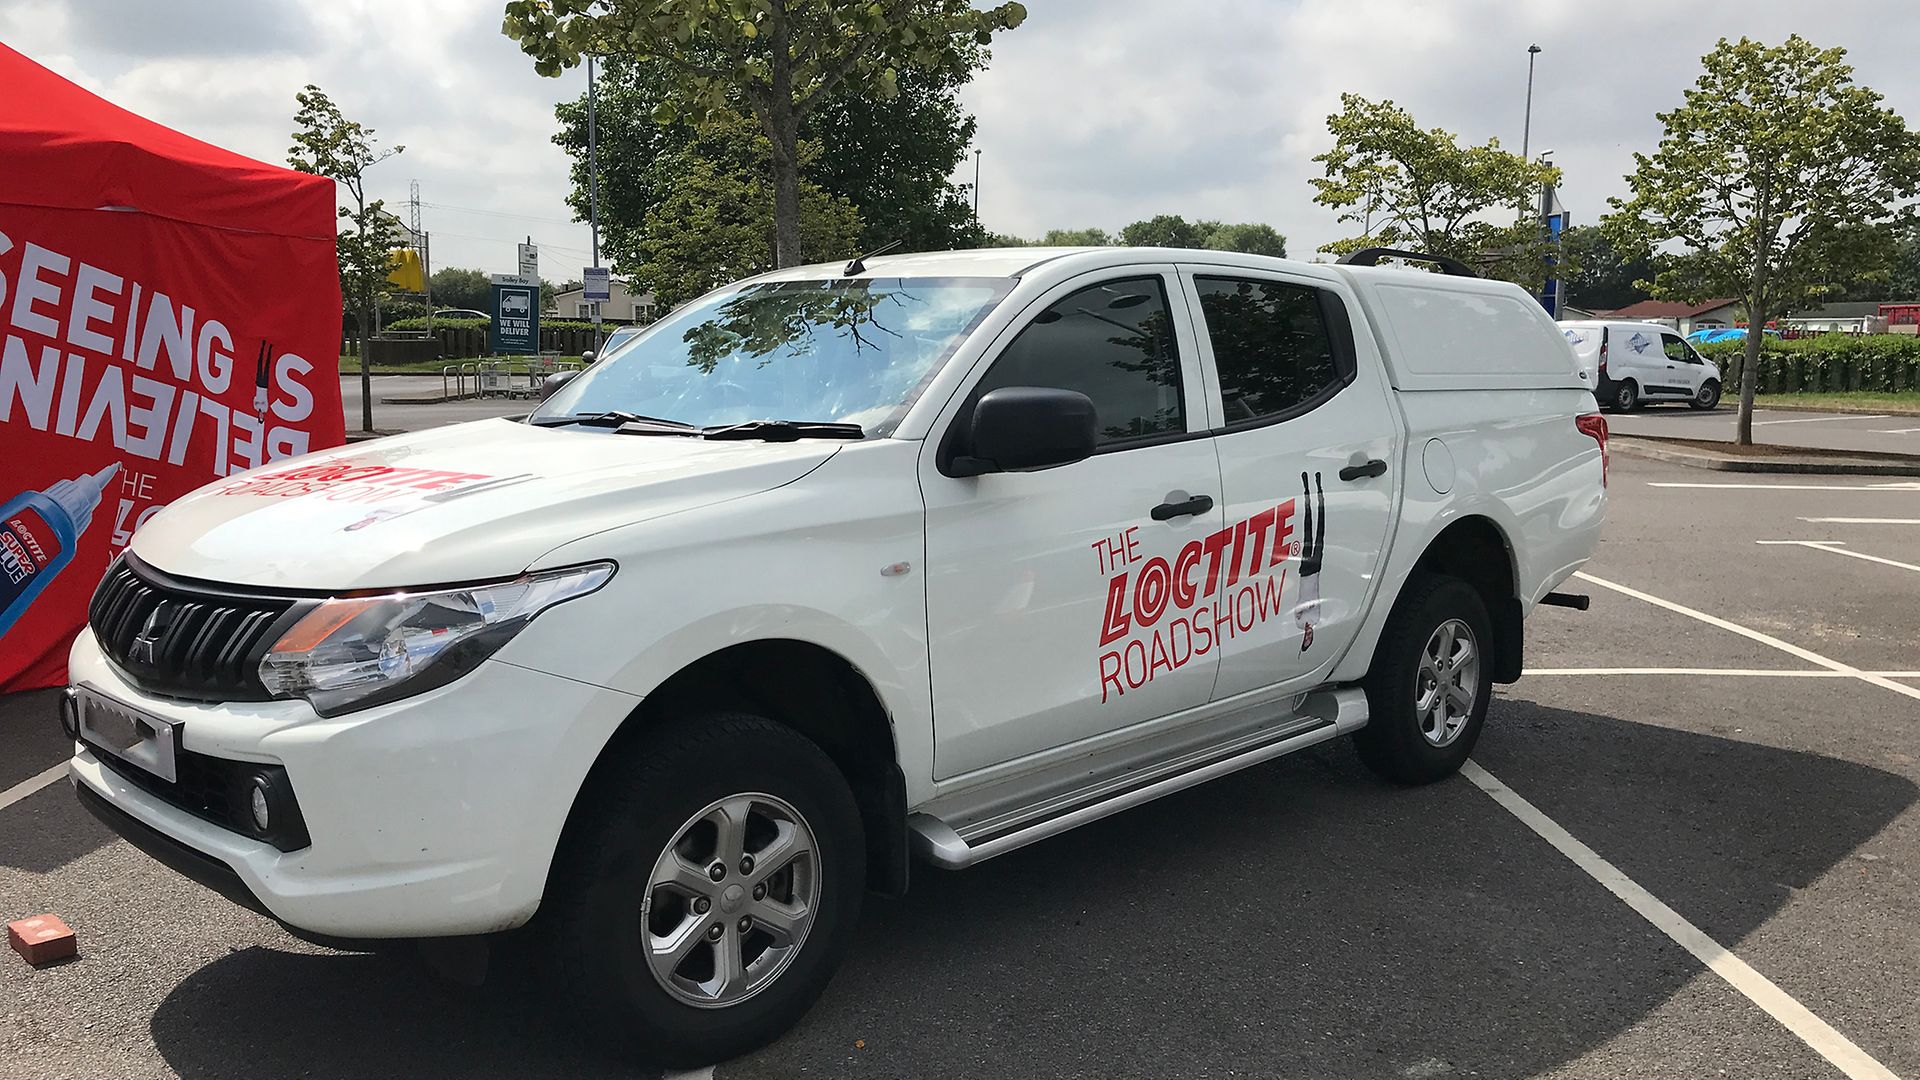 A white Mitsubishi SUV branded with 'The Loctite Roadshow' logo standing on a parking lot